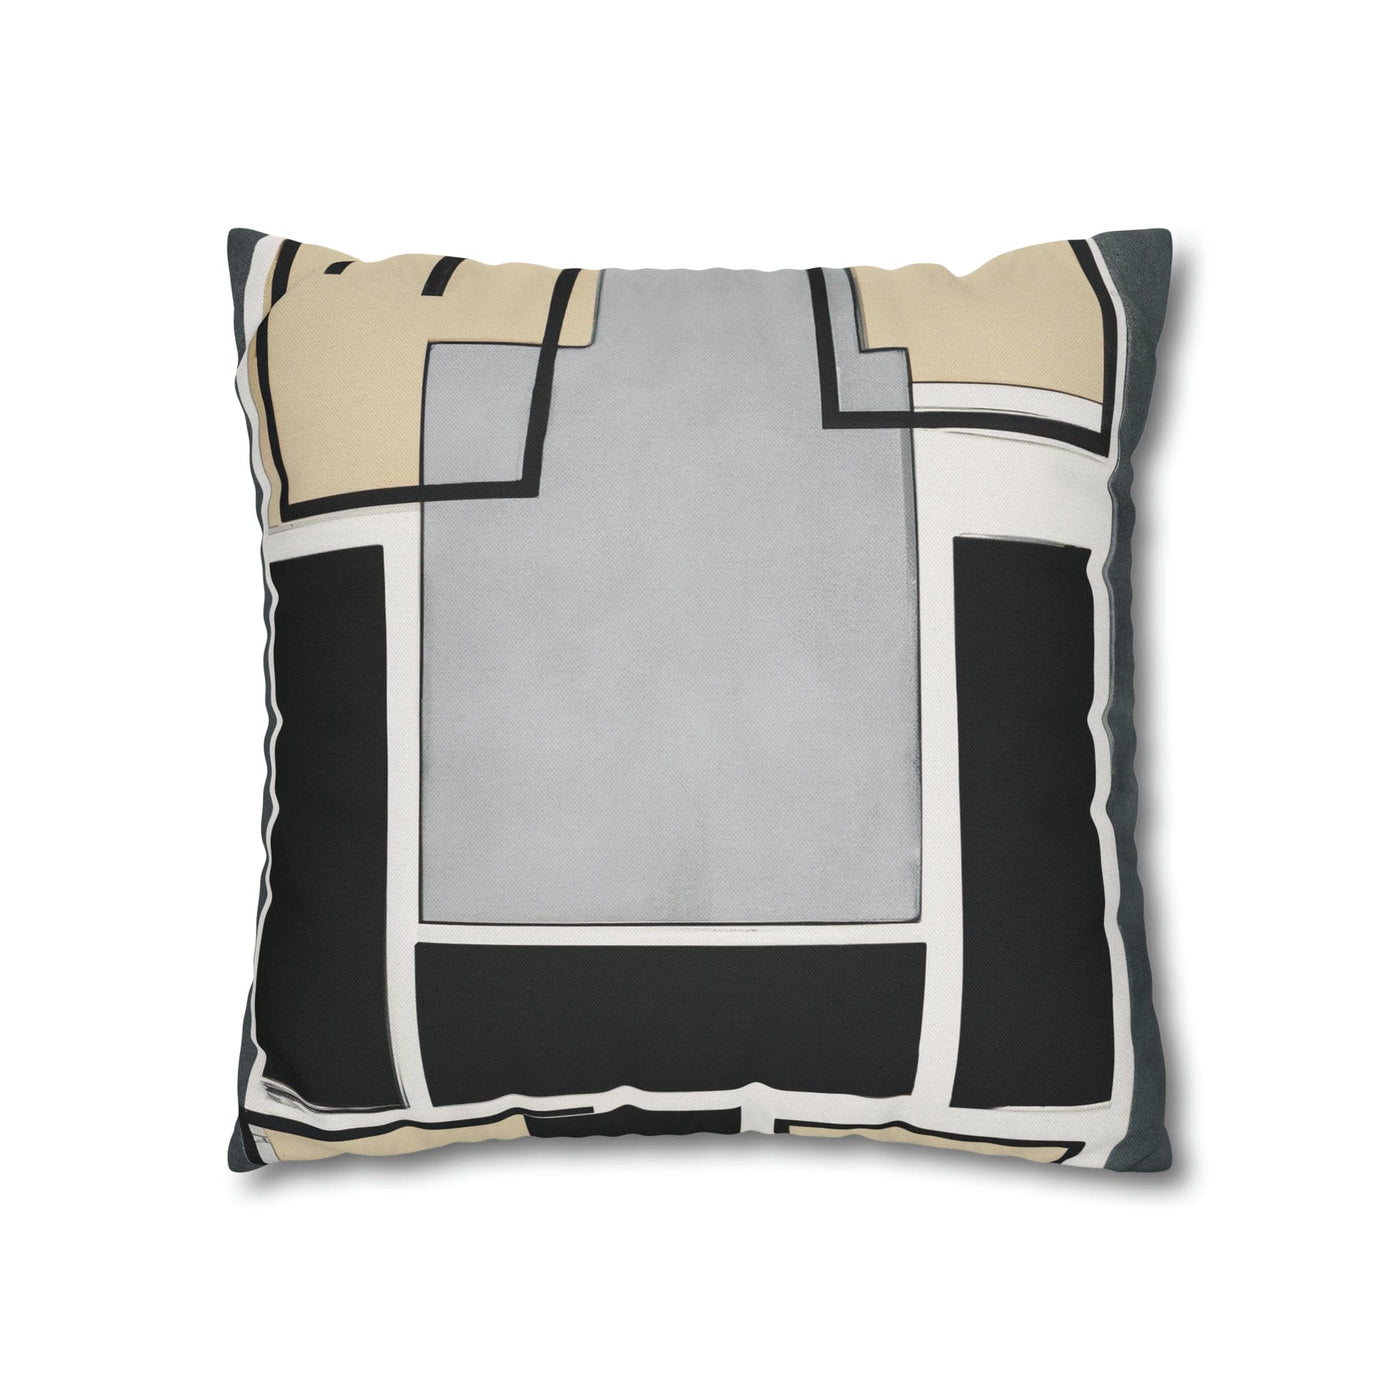 Decorative Throw Pillow Covers With Zipper - Set Of 2 Abstract Black Grey Brown